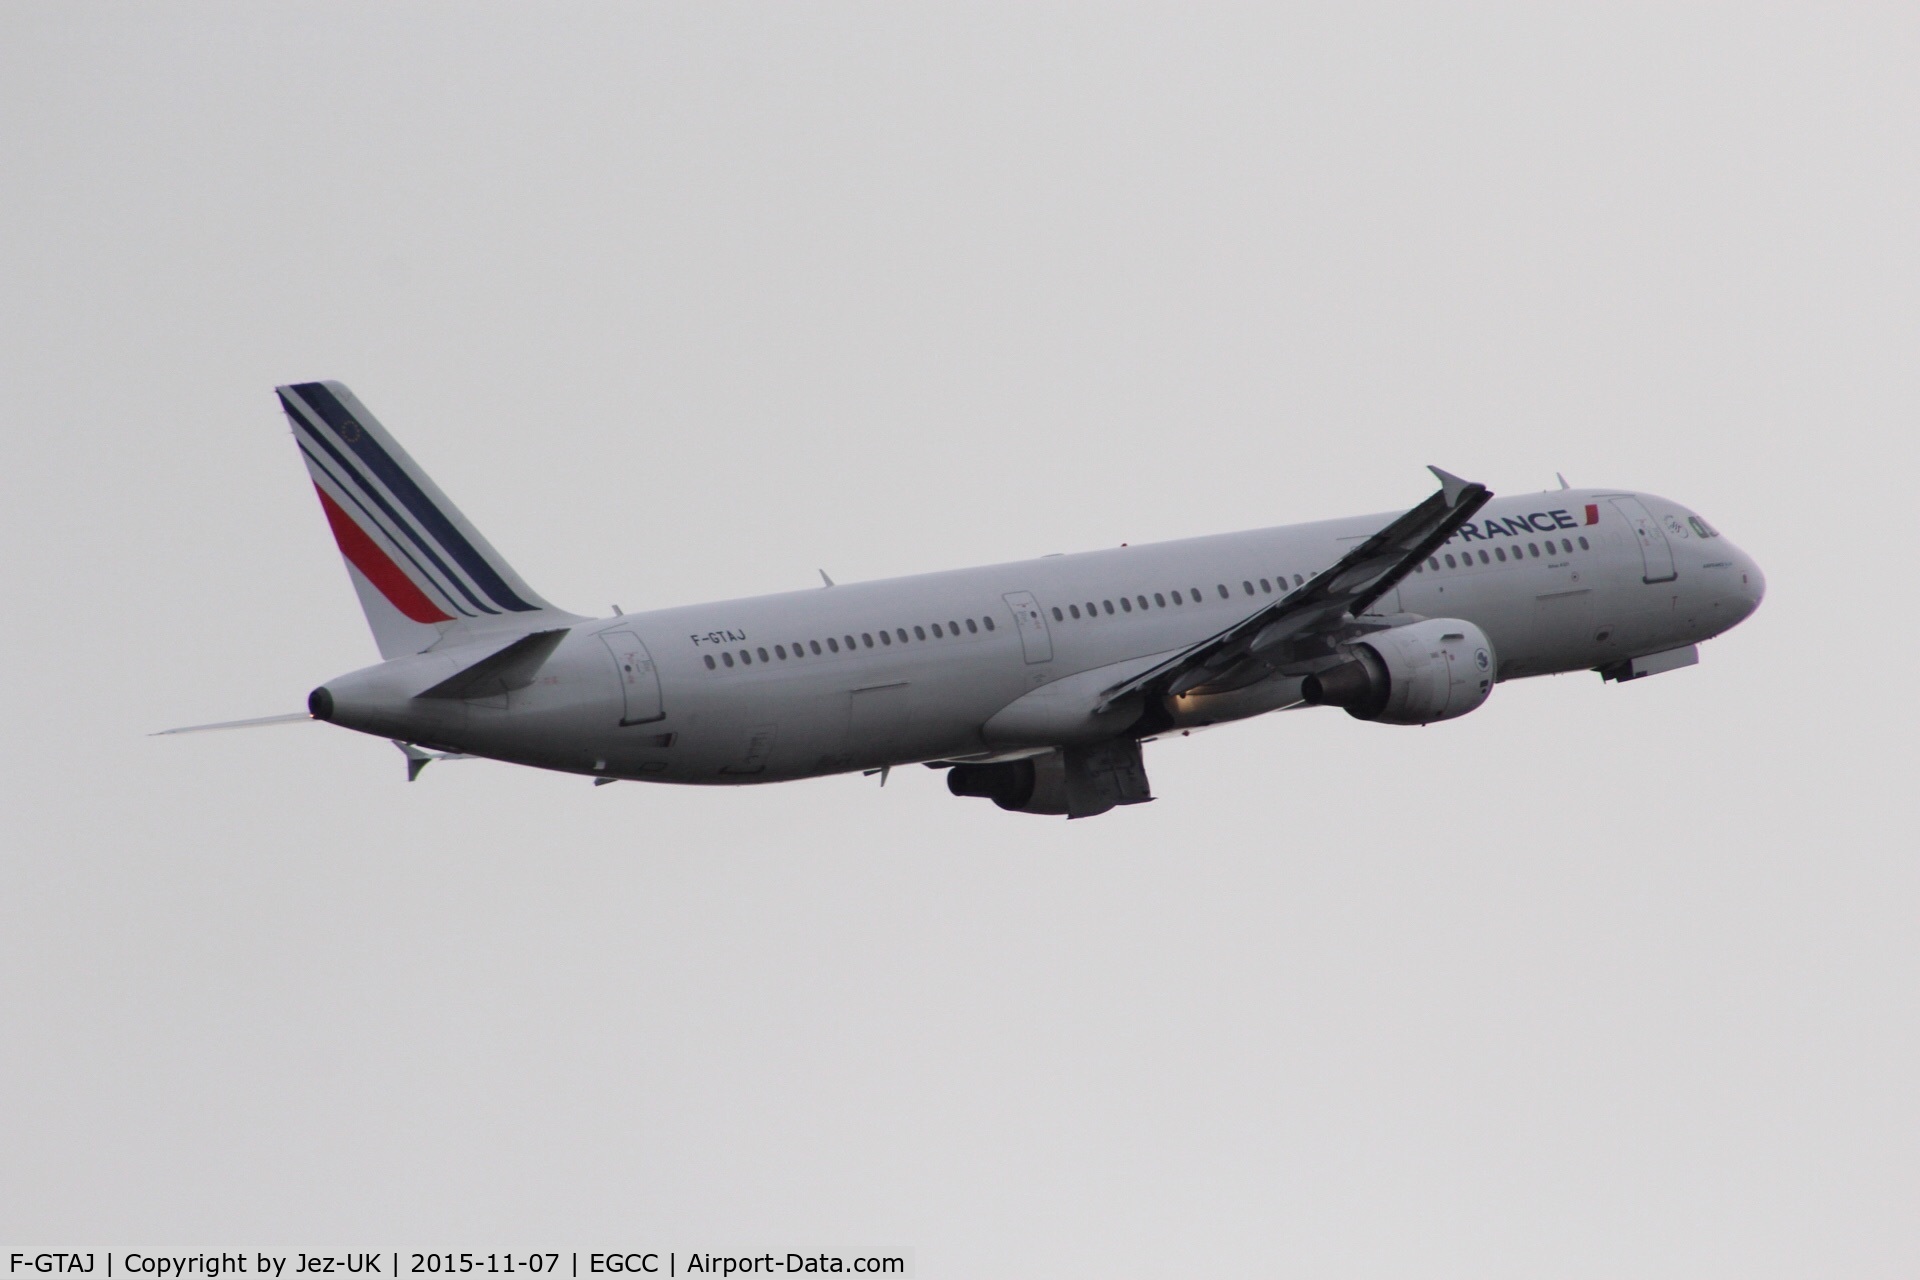 F-GTAJ, 2001 Airbus A321-211 C/N 1476, positive climbout of runway 23r to CDG,